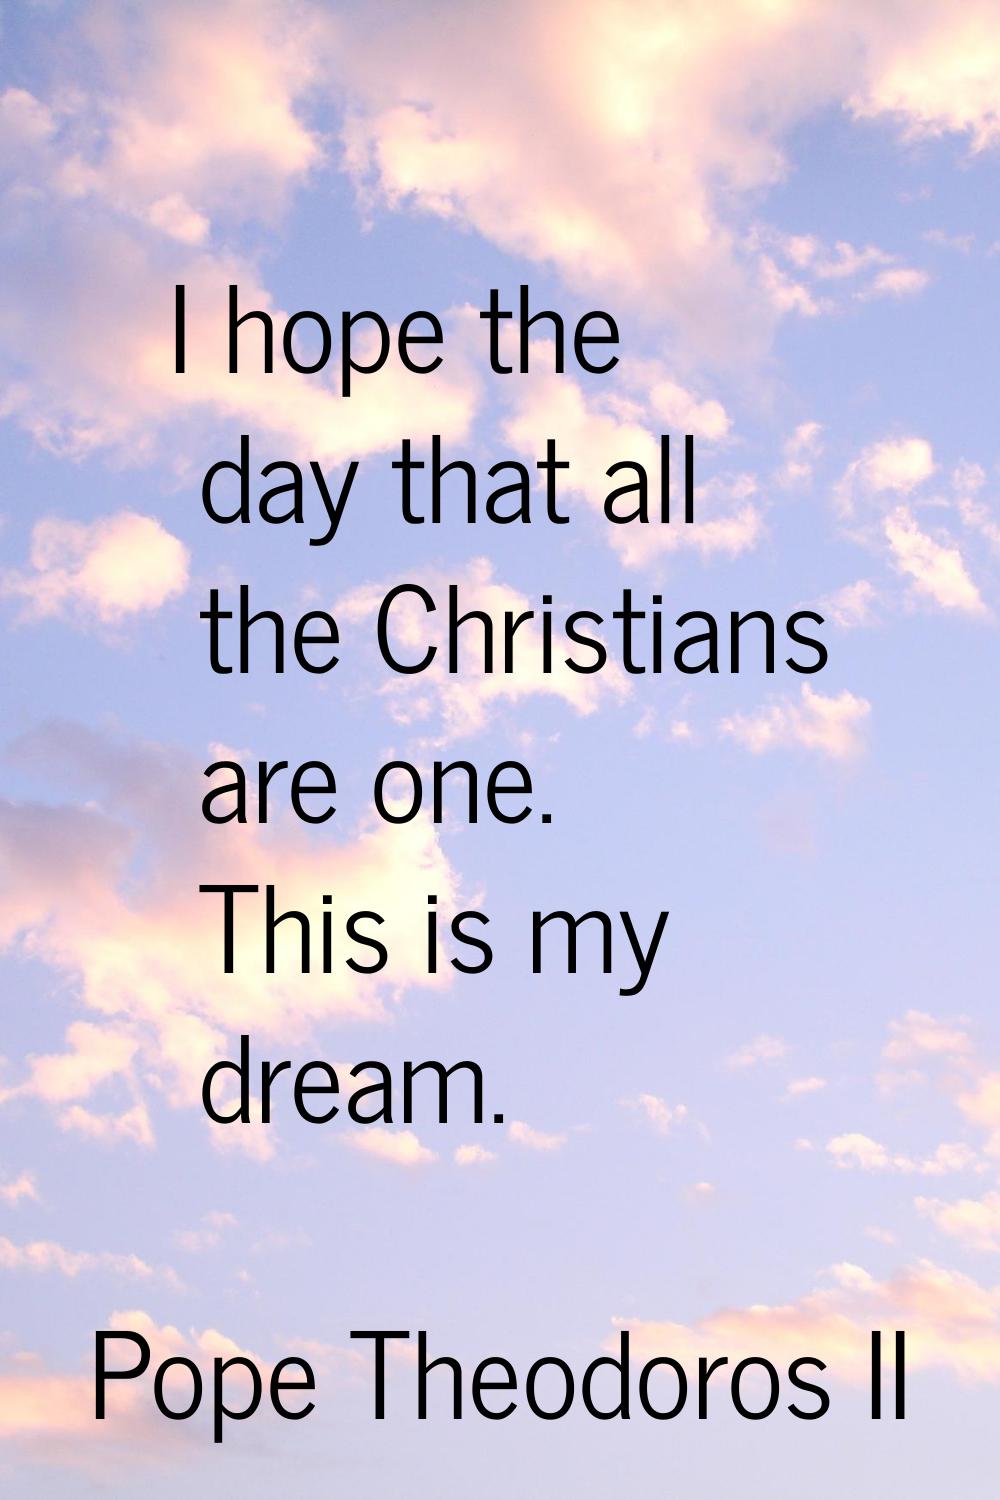 I hope the day that all the Christians are one. This is my dream.